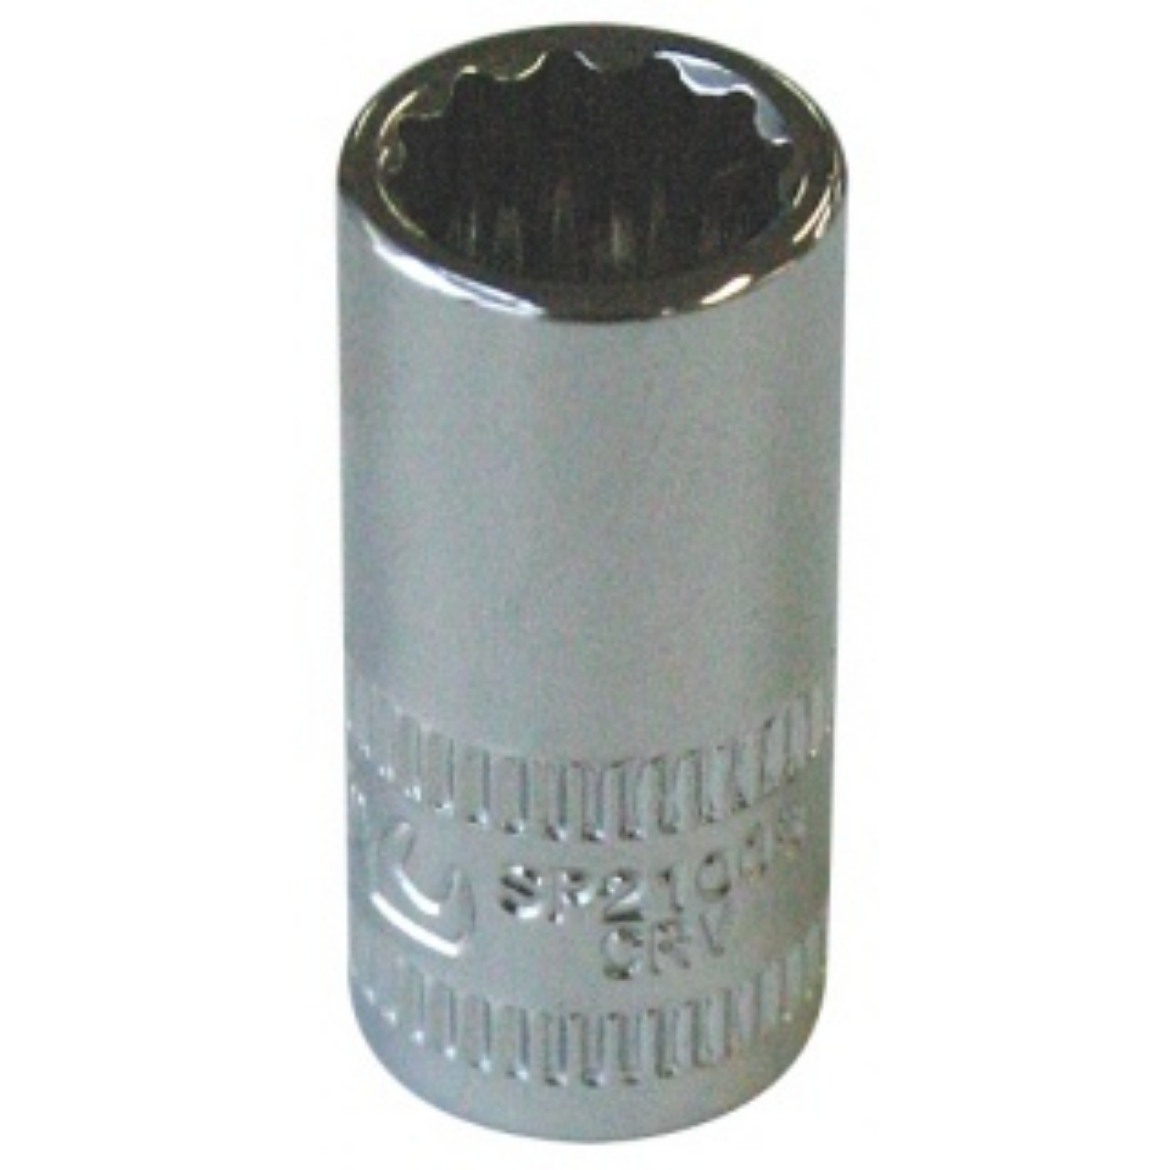 Picture of SOCKET 1/4"DR 12 PT METRIC 6MM SP TOOLS